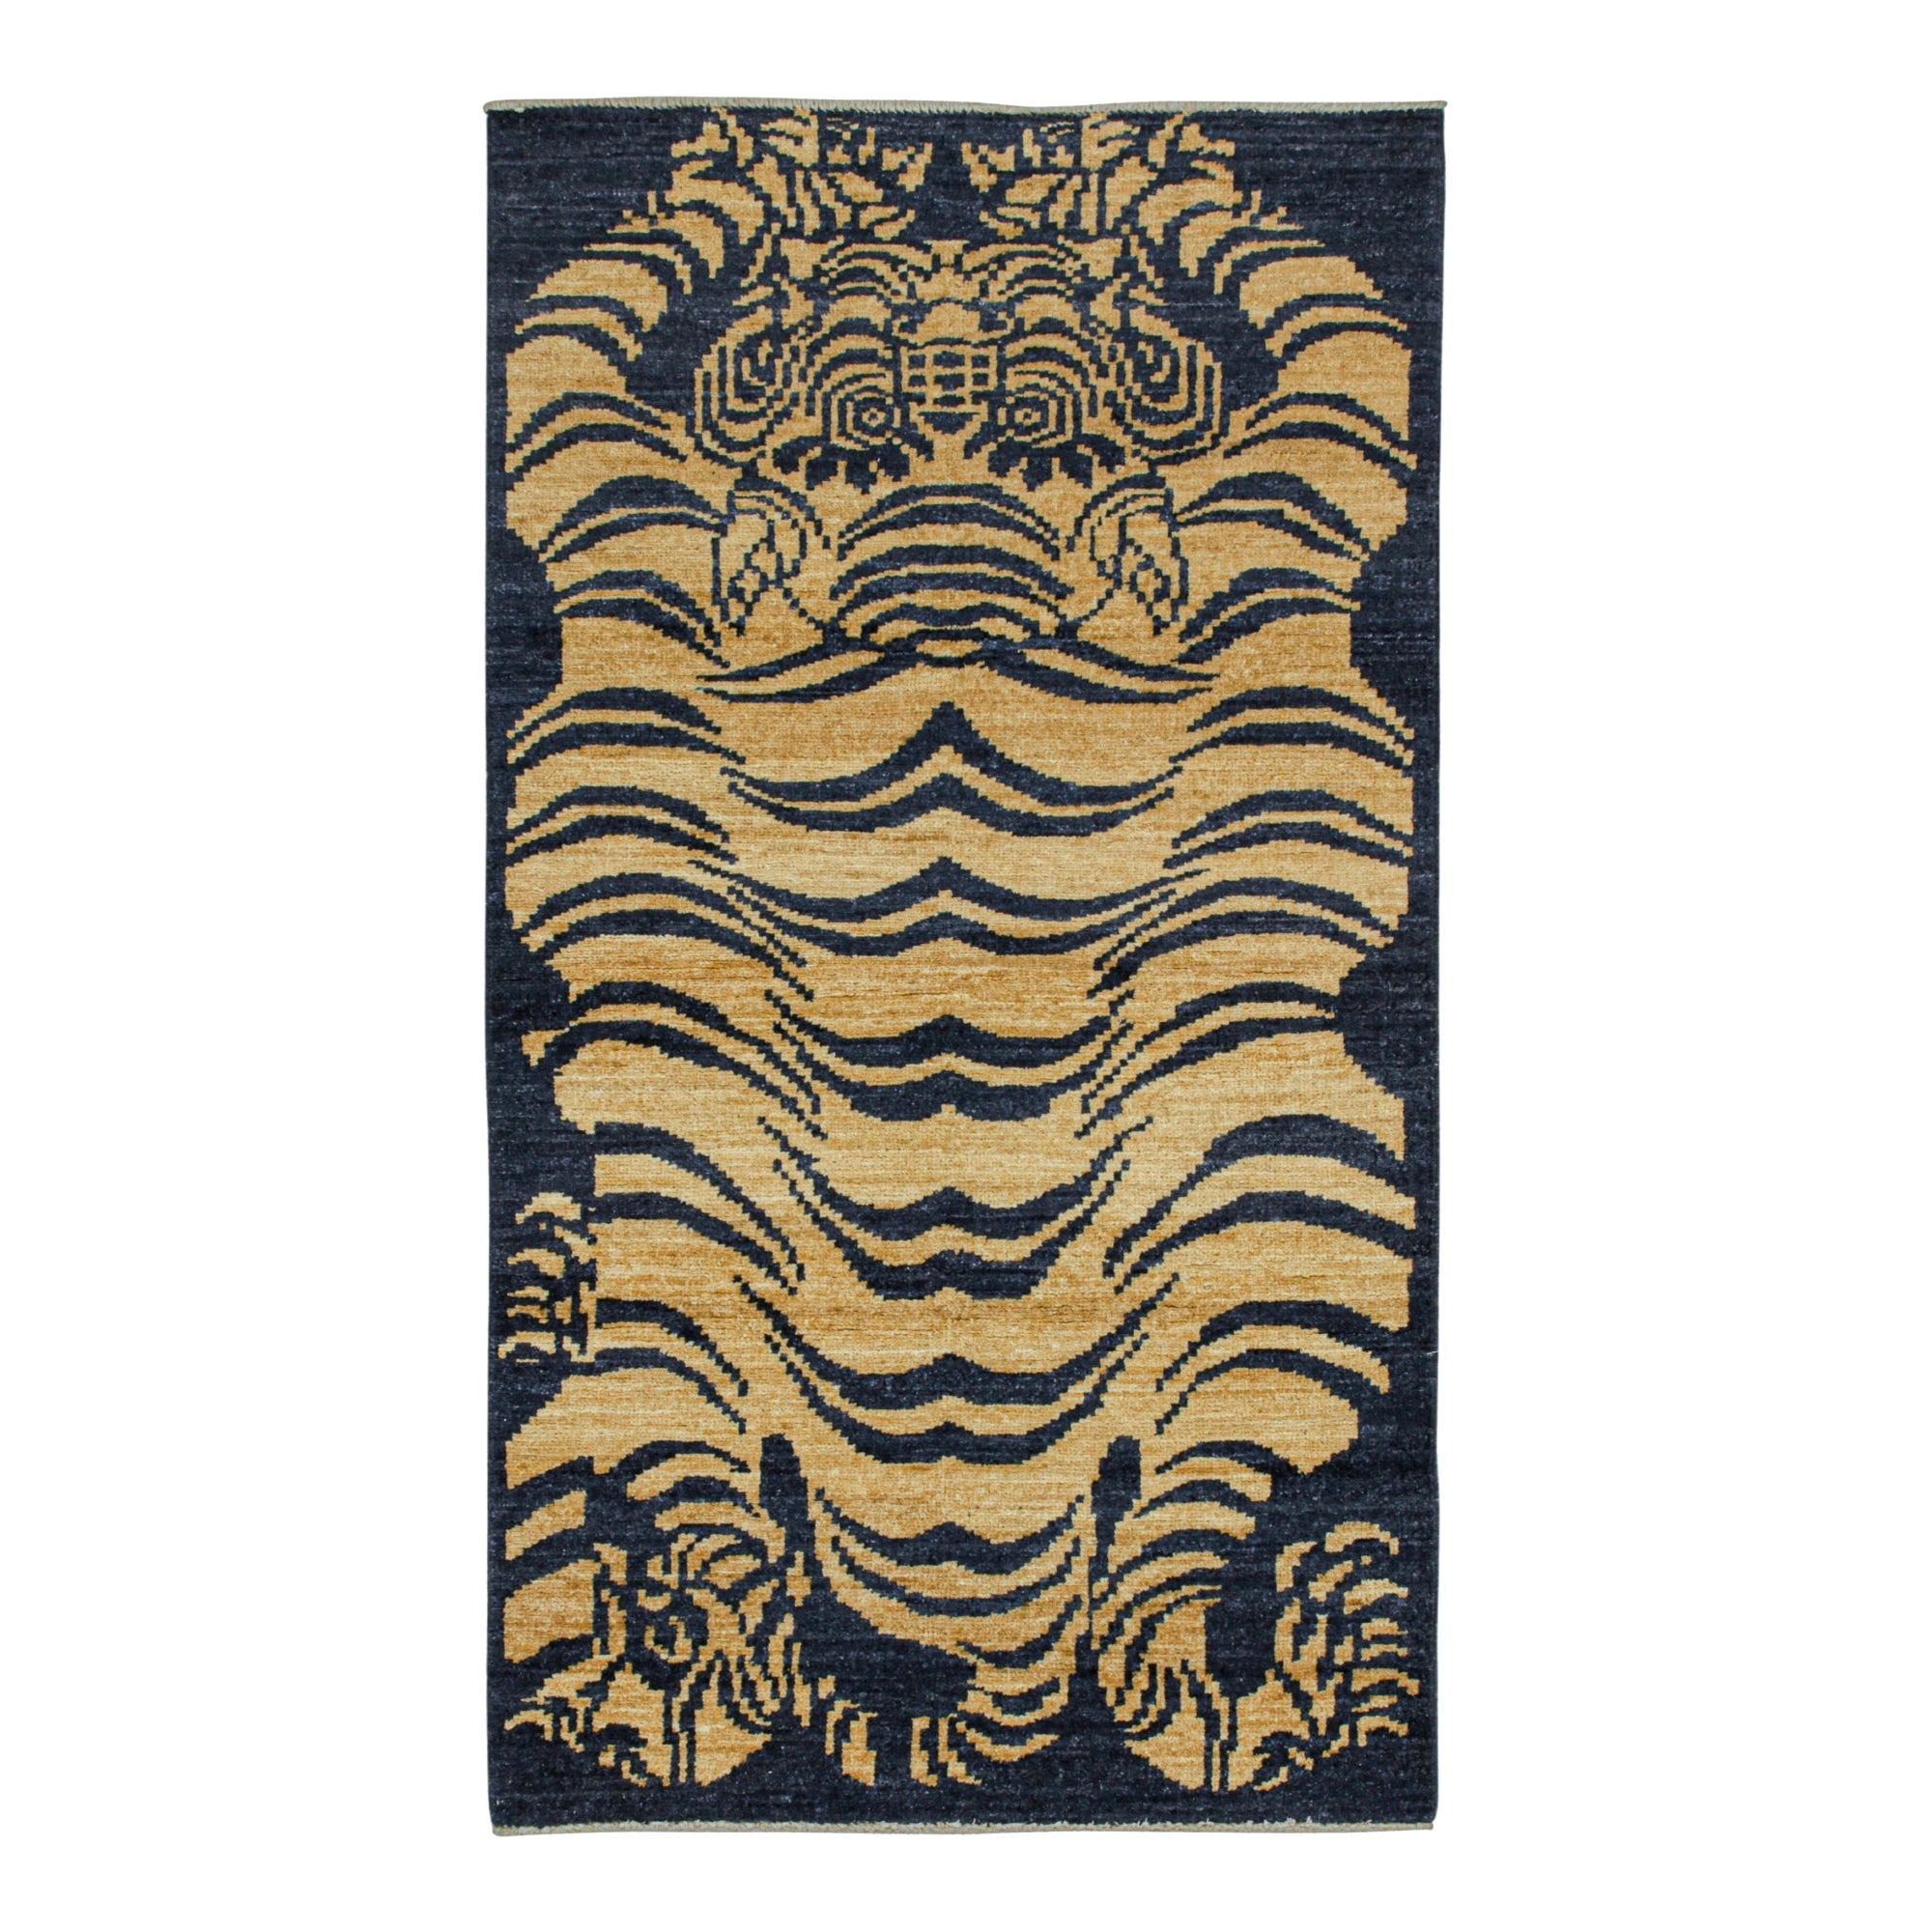 Rug & Kilim’s Classic Style Tiger Runner in Navy Blue and Gold Pictorial For Sale